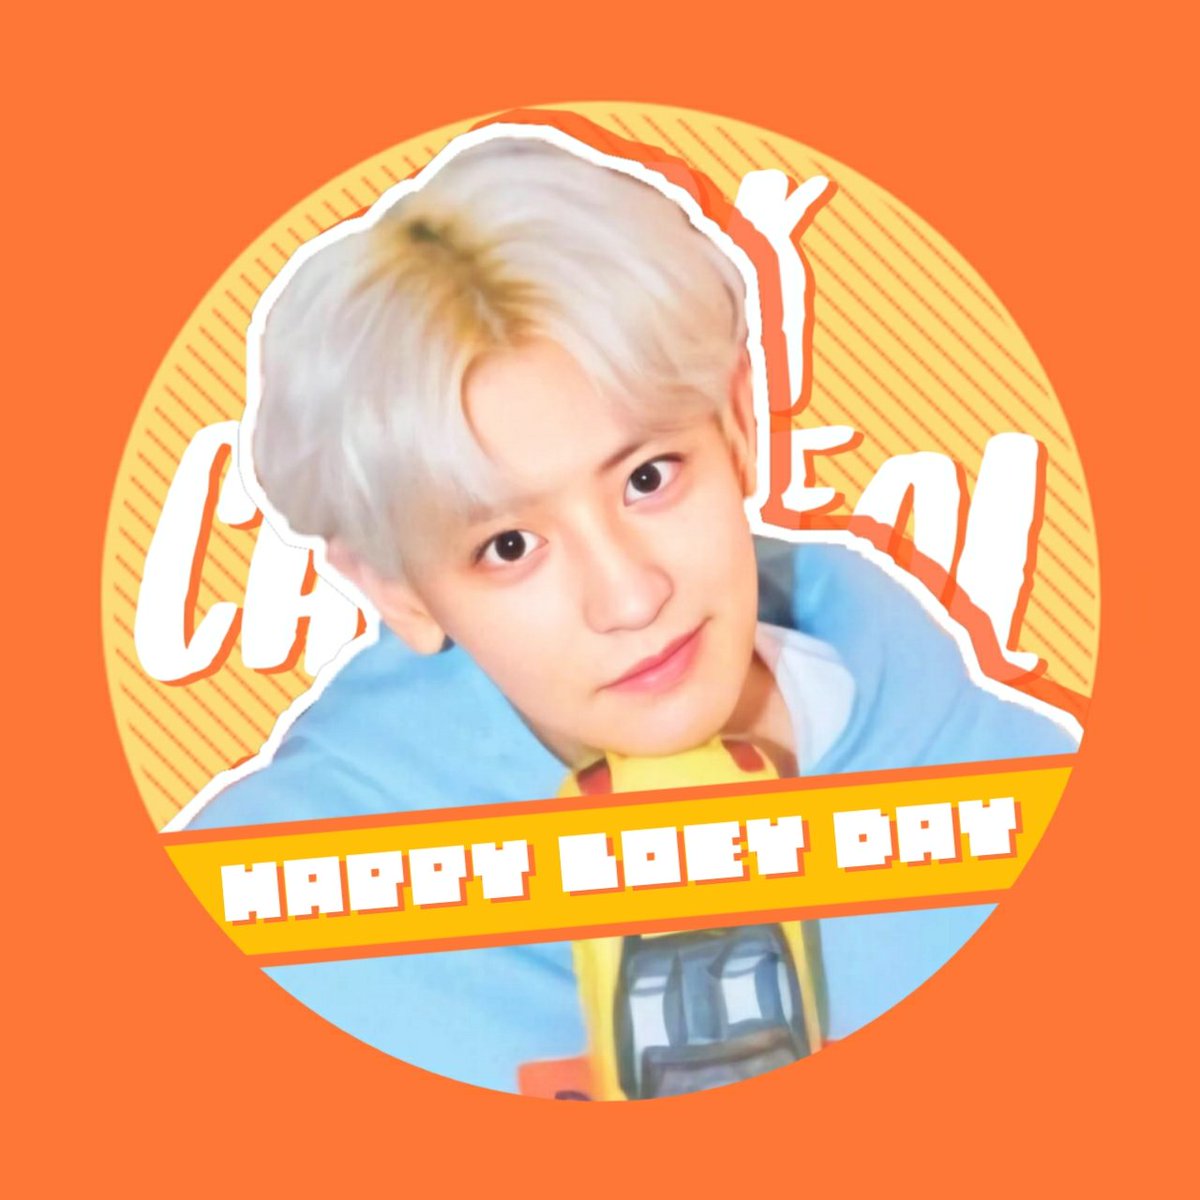 hi y'all, I made some Loey icons & headers. I hope that you'll appreciate them T-T[ #HAPPYLOEYDAY in advanced] @weareoneEXO